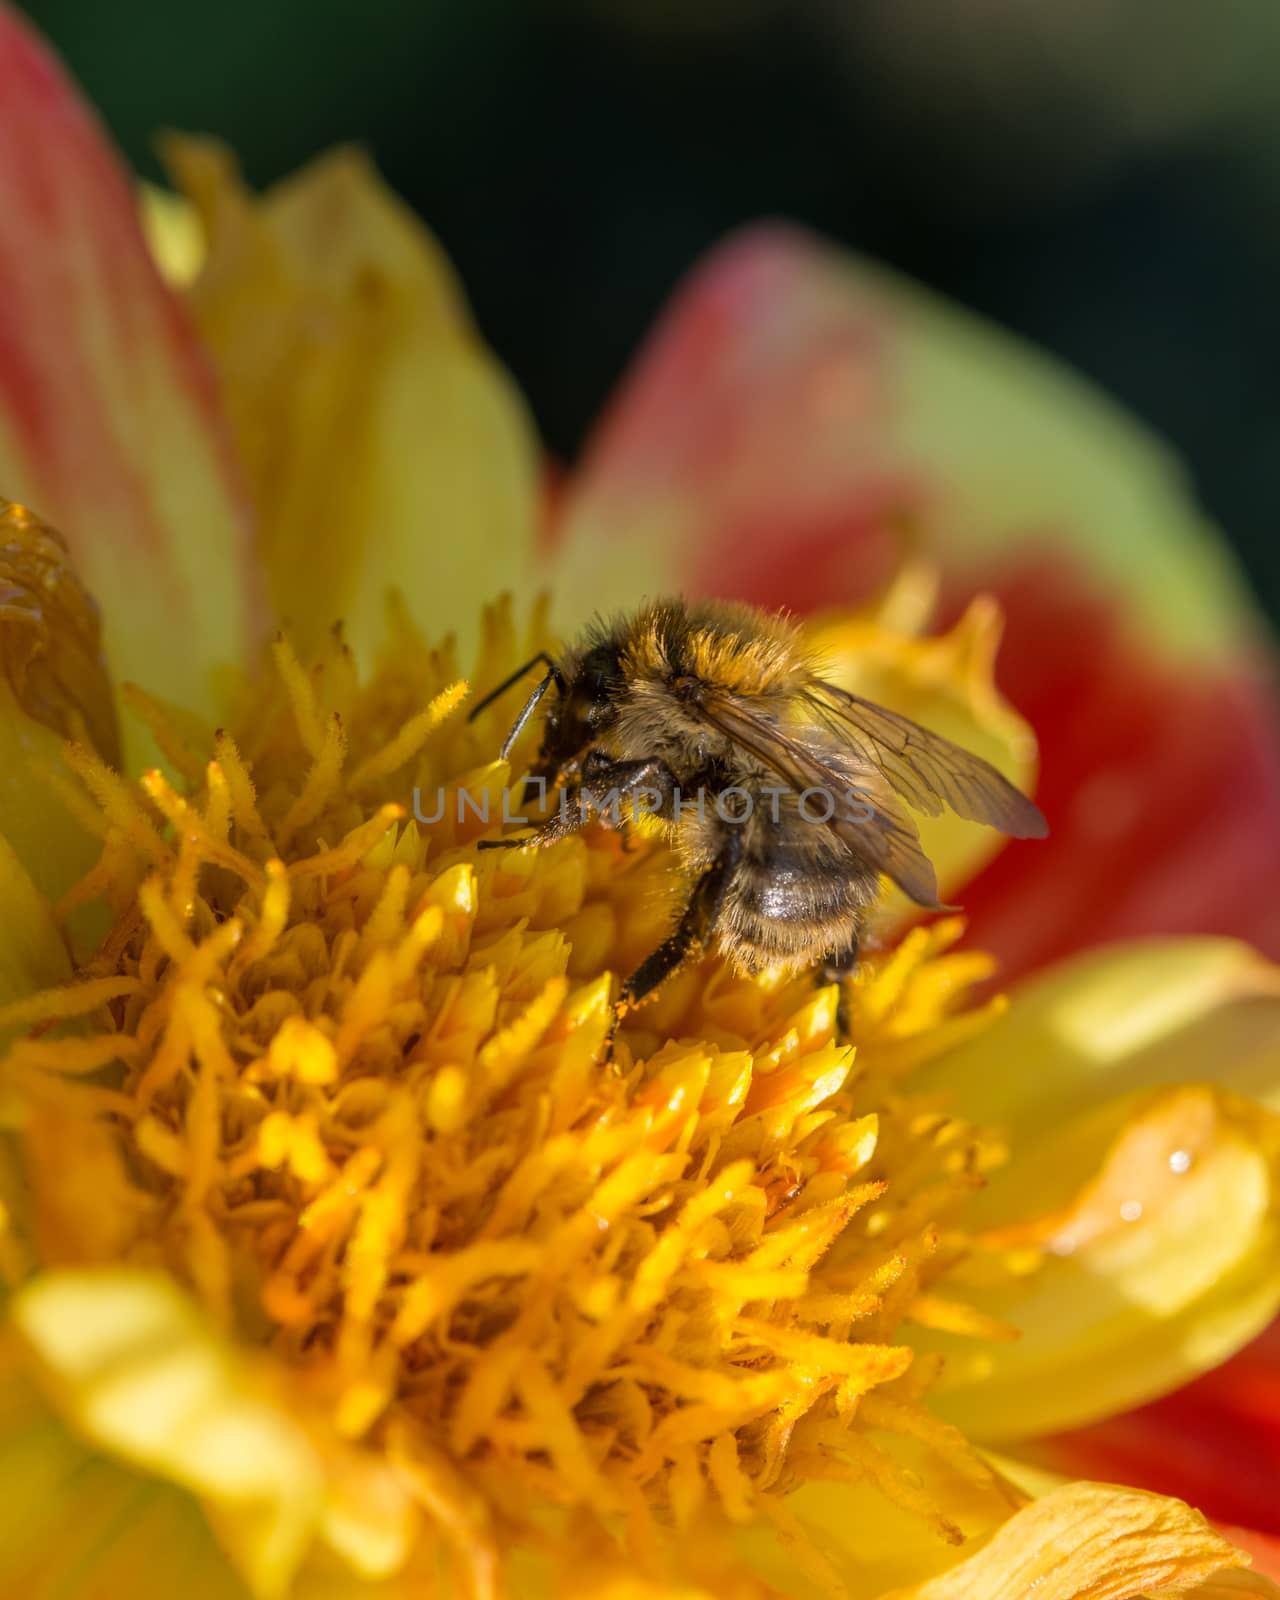 Leafcutter bee on yellow and red flower  by frankhoekzema